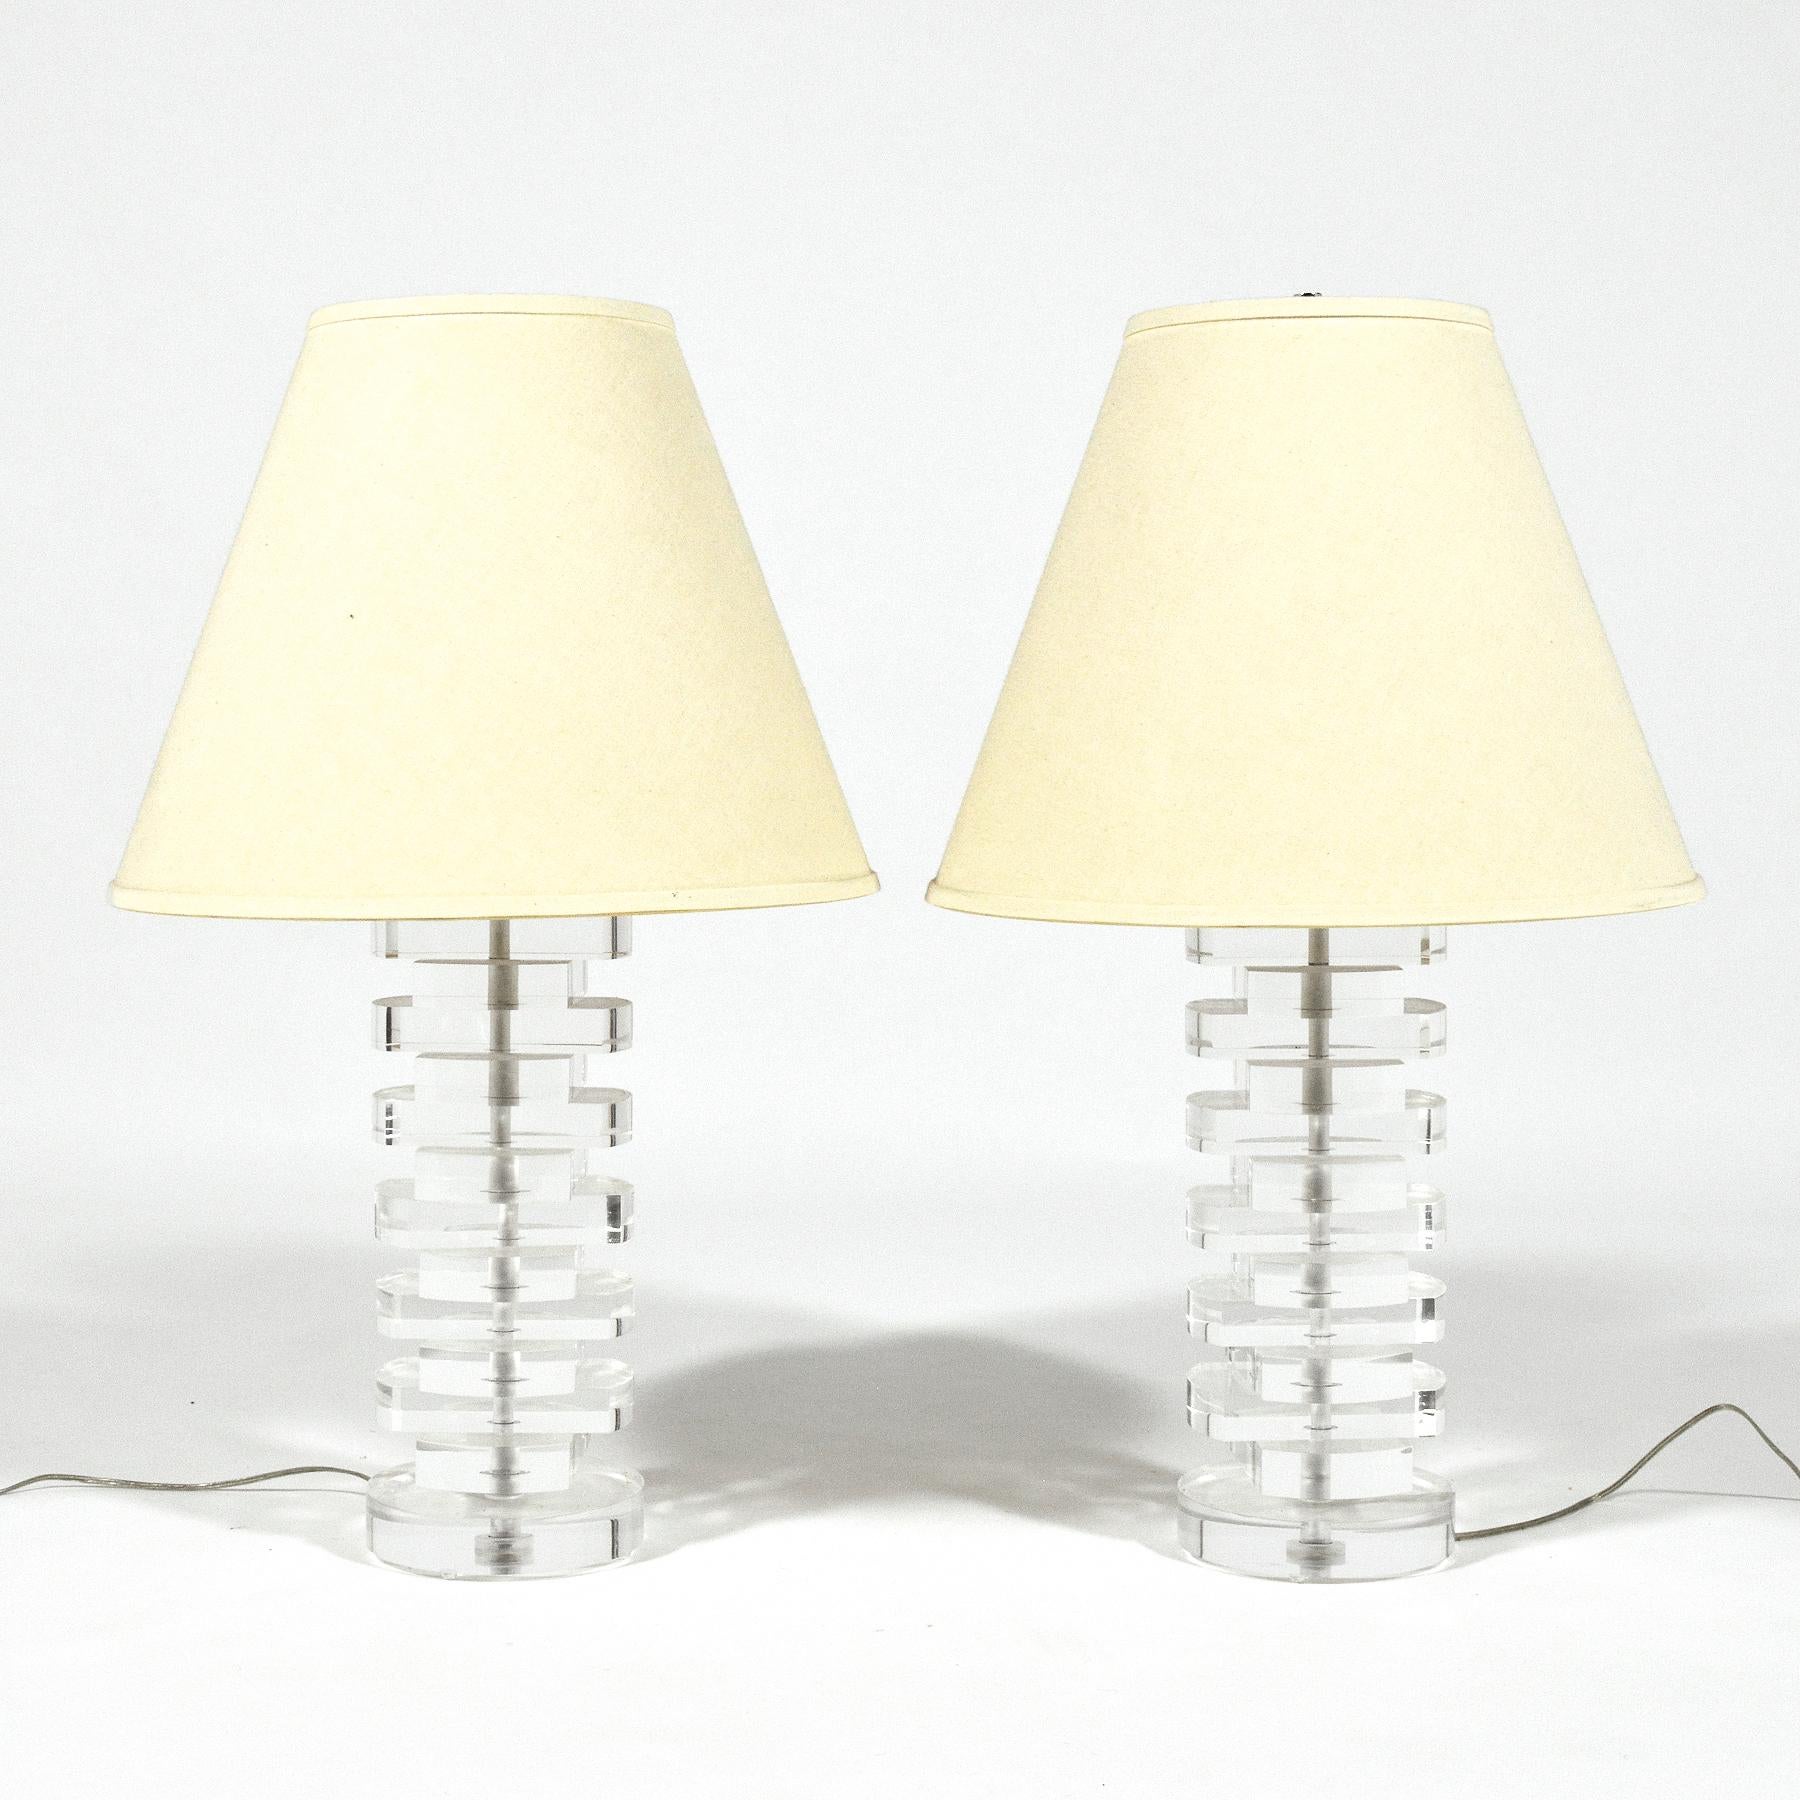 These elegant table lamps by Lang-Levin are far beyond the ordinary. A masterful combination of refined design and exceptional craftsmanship. Made of stacked Lucite shapes they change their appearance based on the viewer's perspective. No detail is